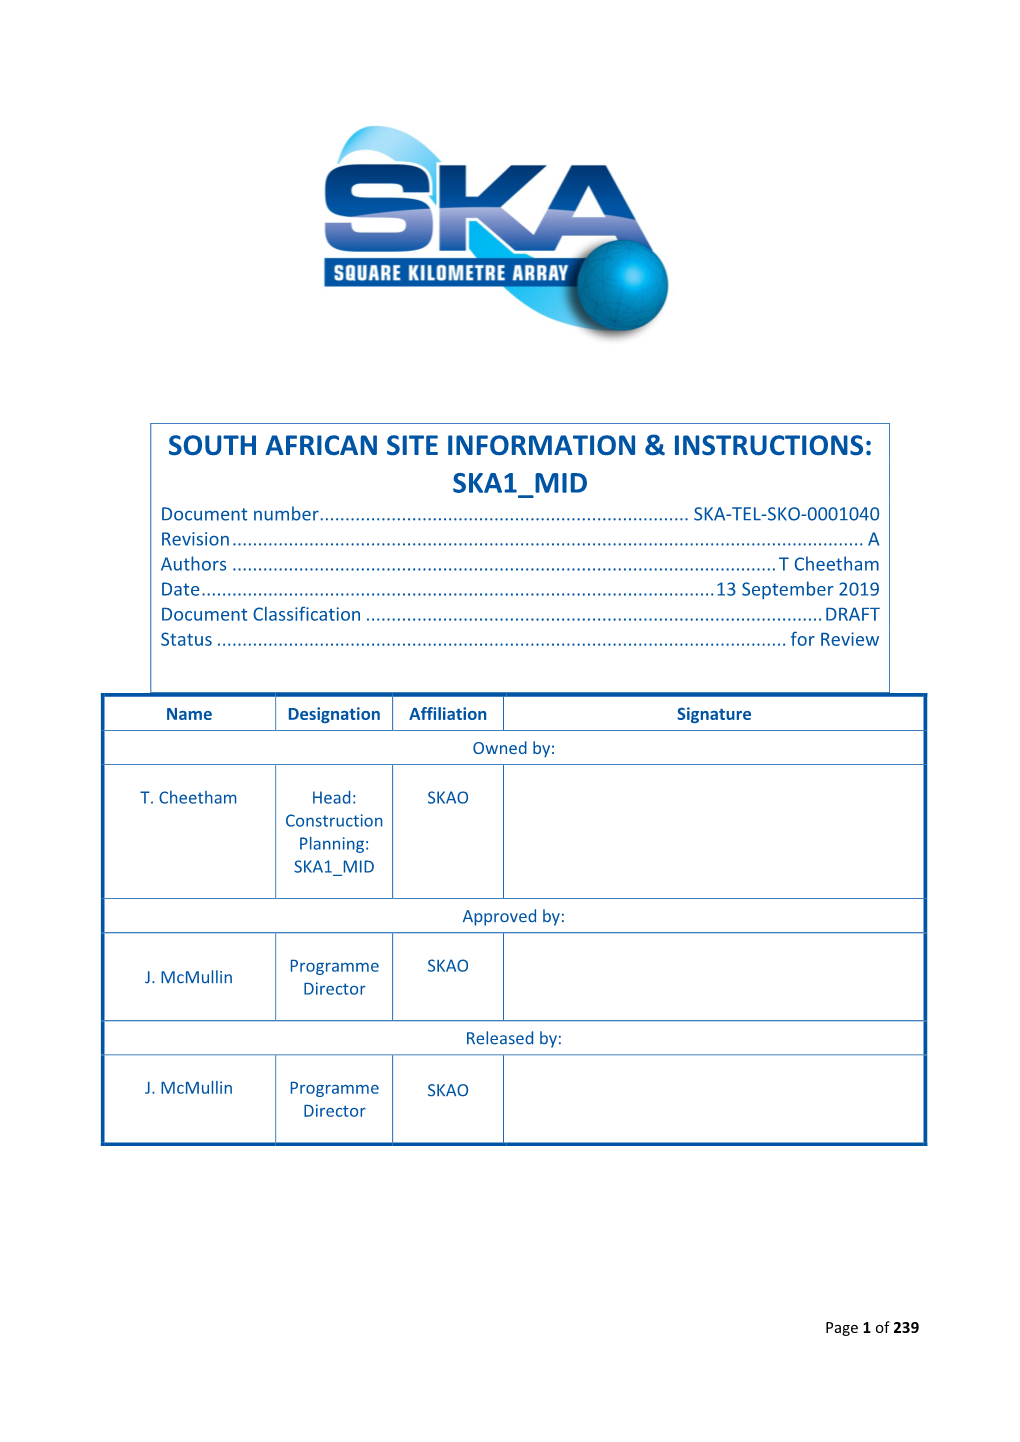 South African Site Information & Instructions